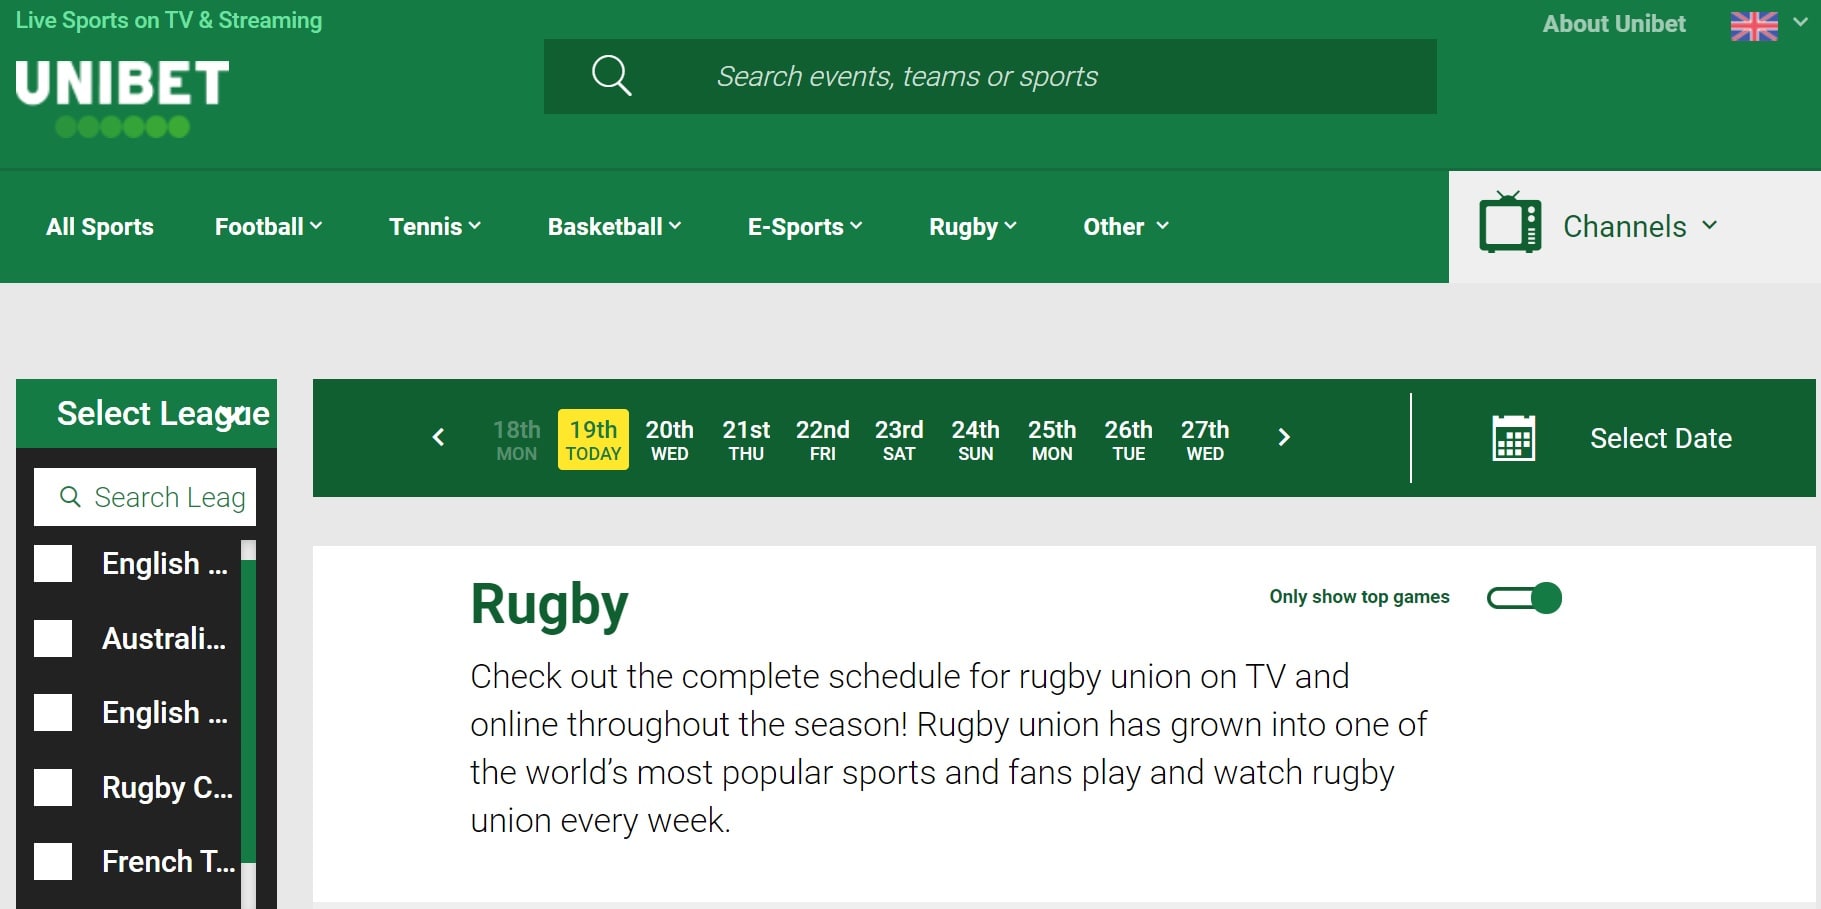 Unibet rugby streaming sites min